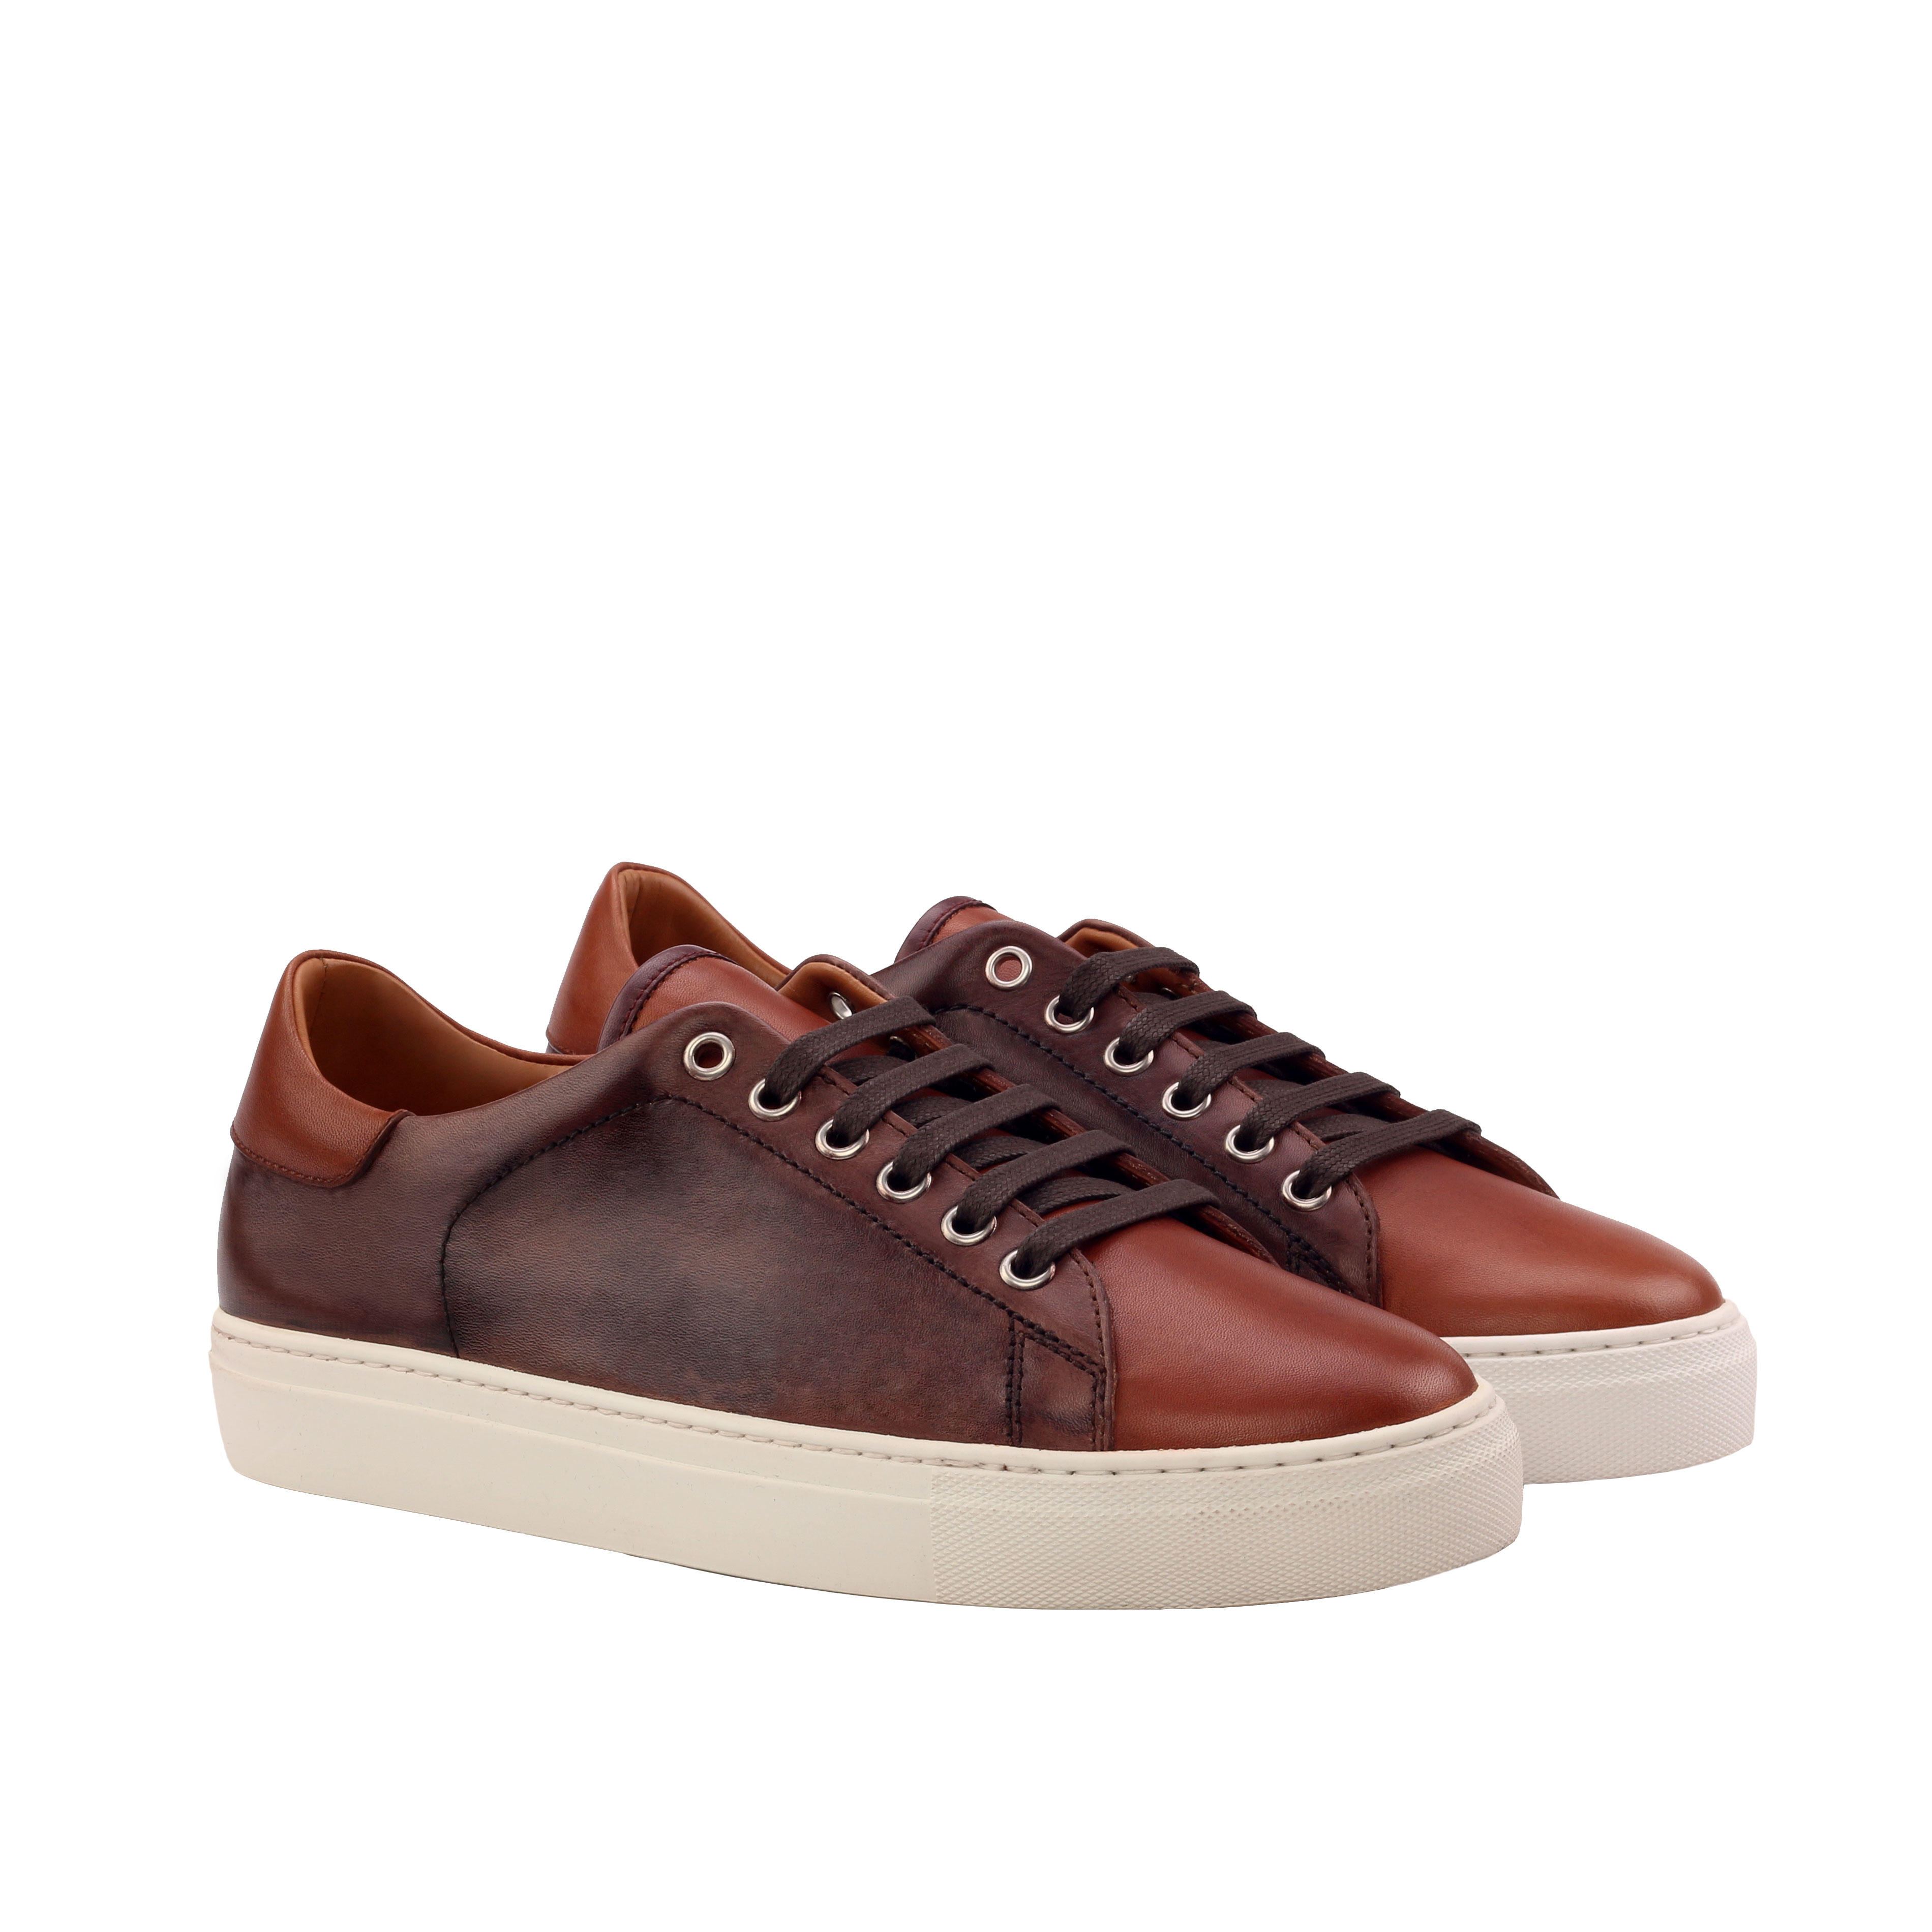 MANOR OF LONDON'The Perry' Painted Cognac & Brown Calfskin Tennis Trainer Luxury Custom Initials Monogrammed Front Side View